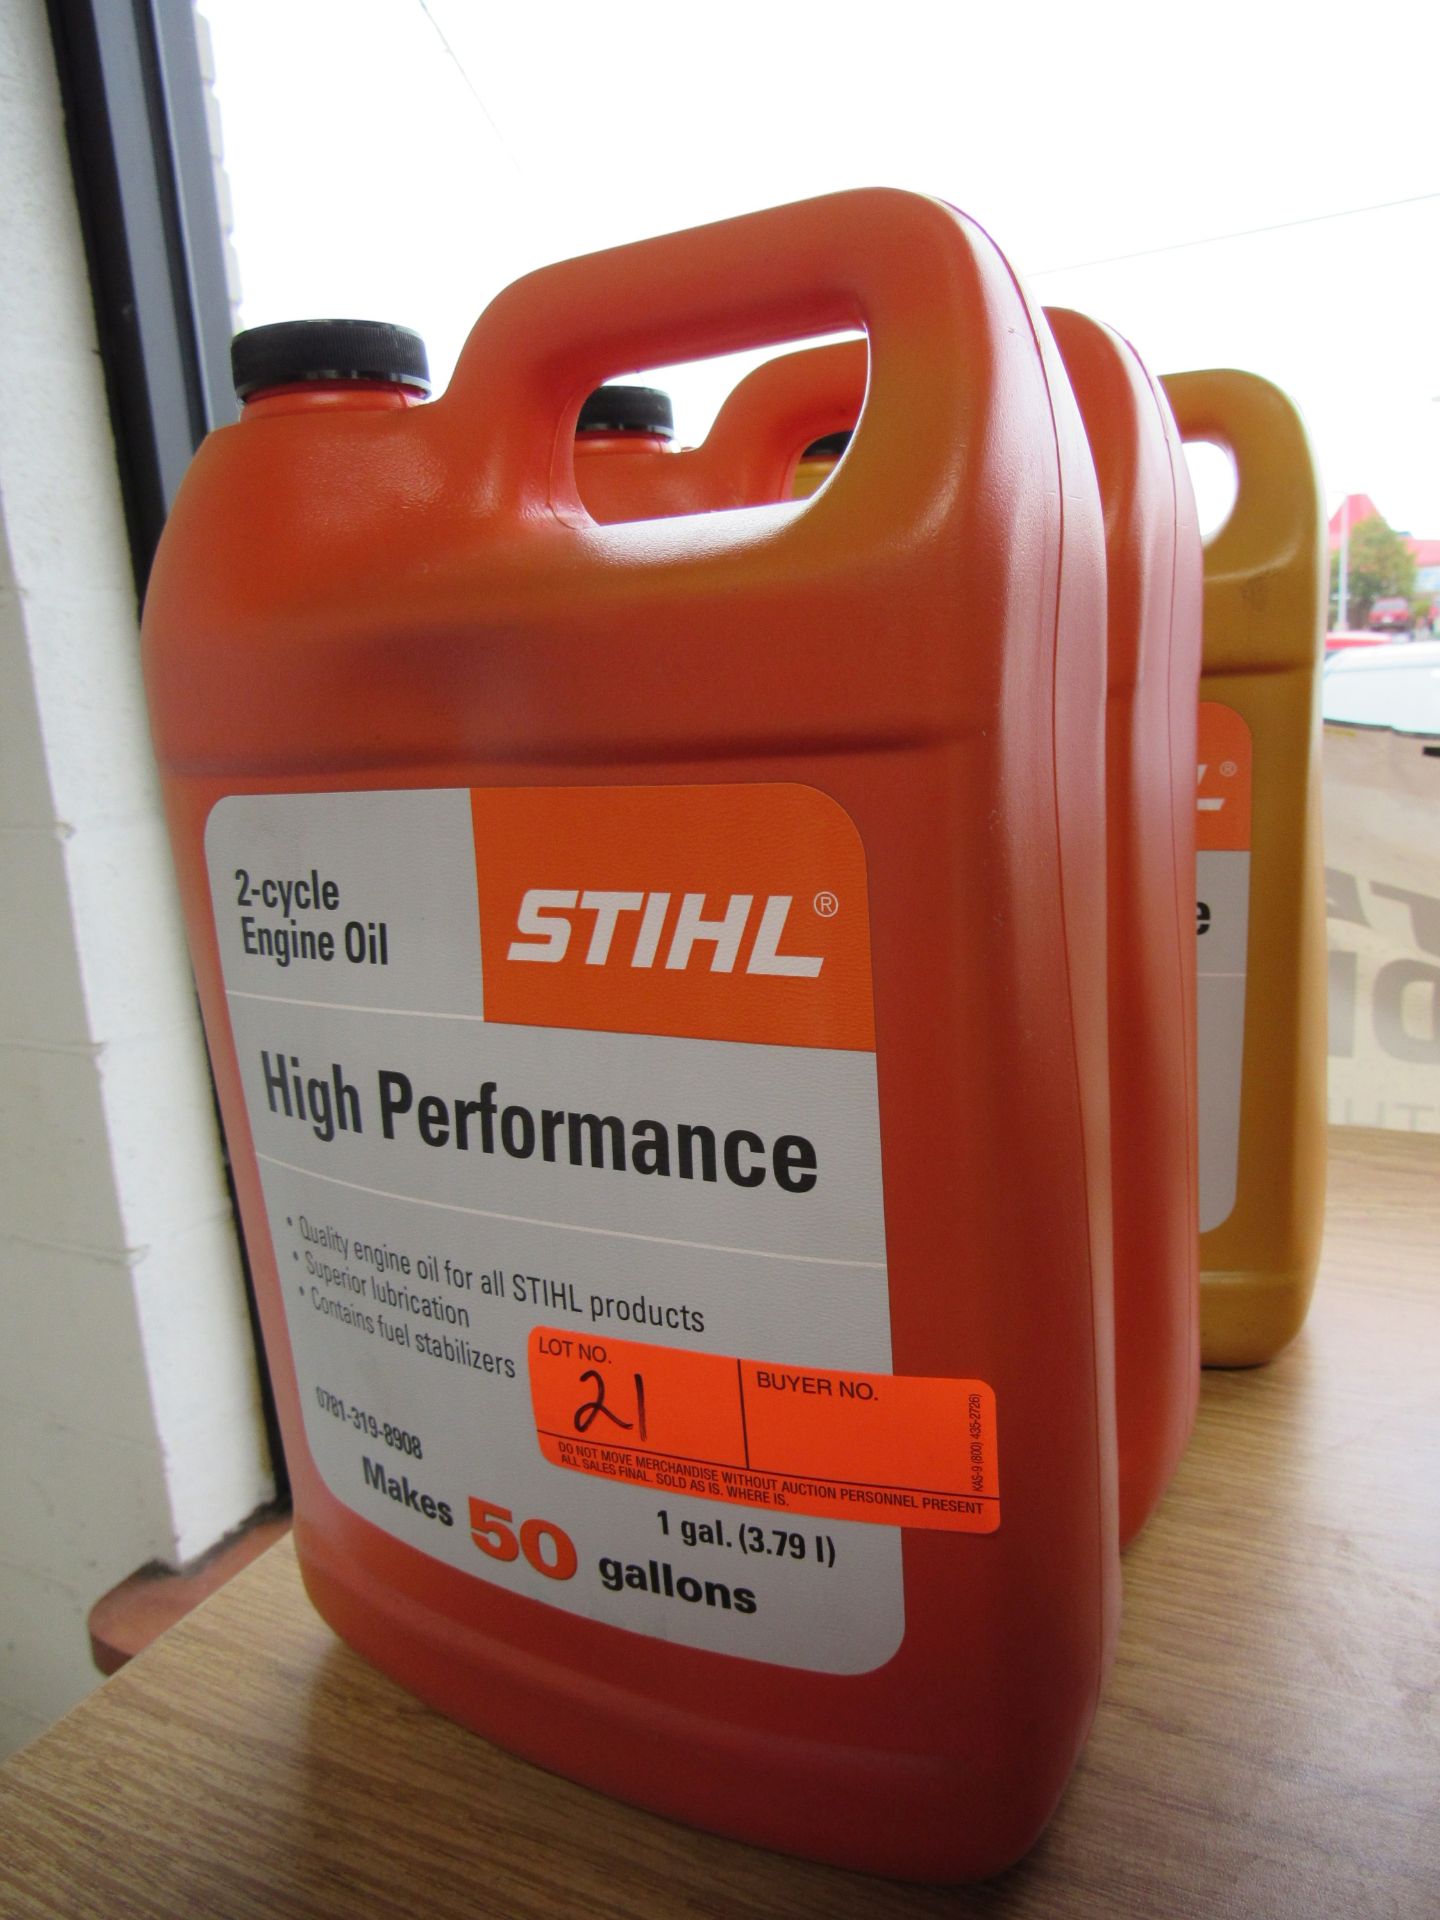 Stihl - three gallons of two-cycle